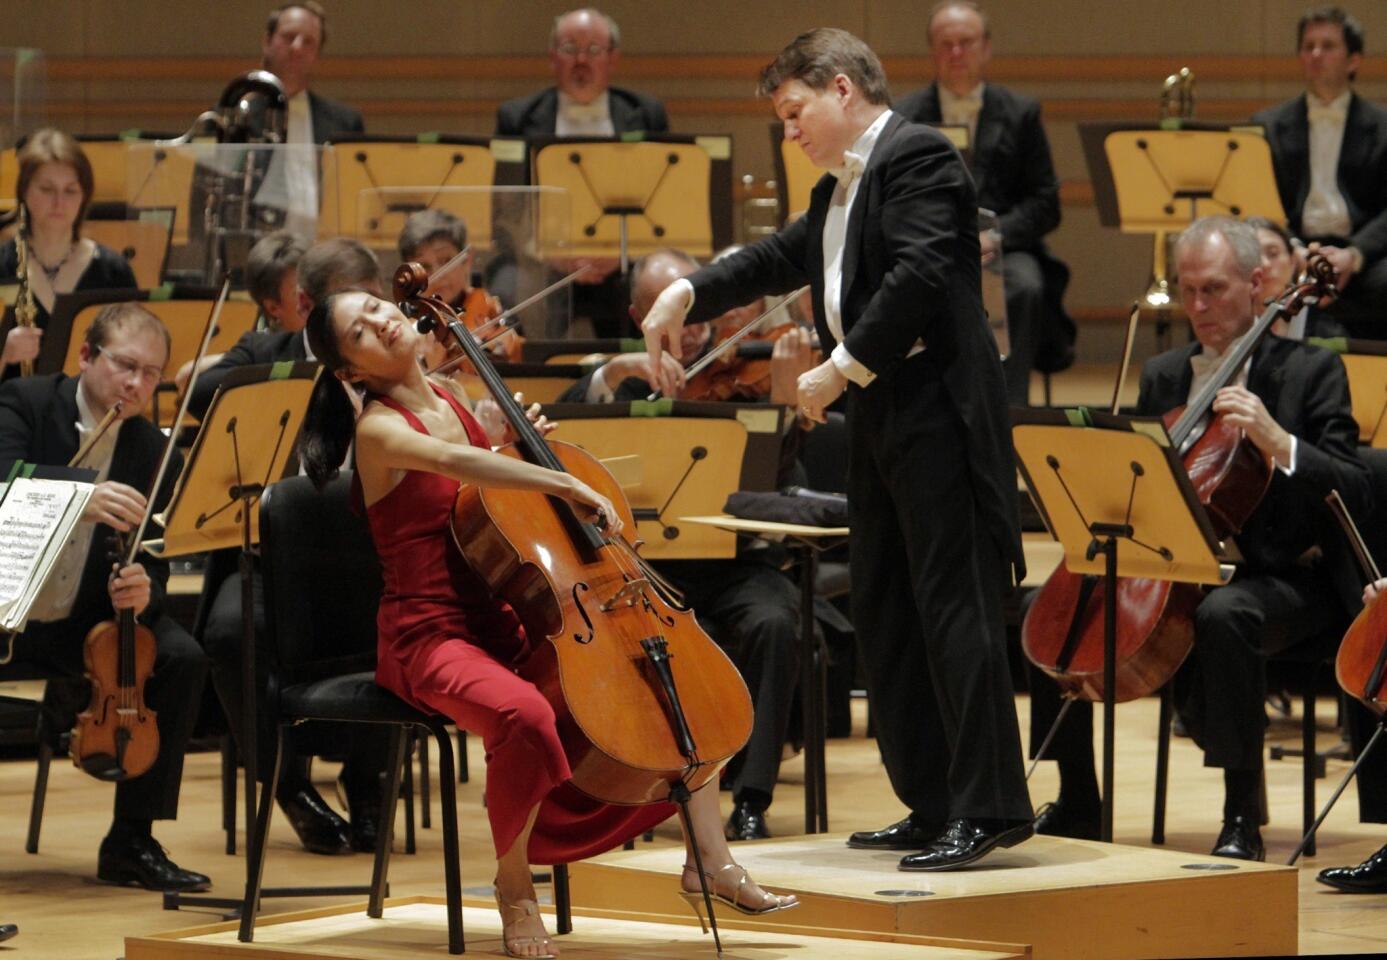 Arts and culture in pictures by The Times | Cellist Sophie Shao